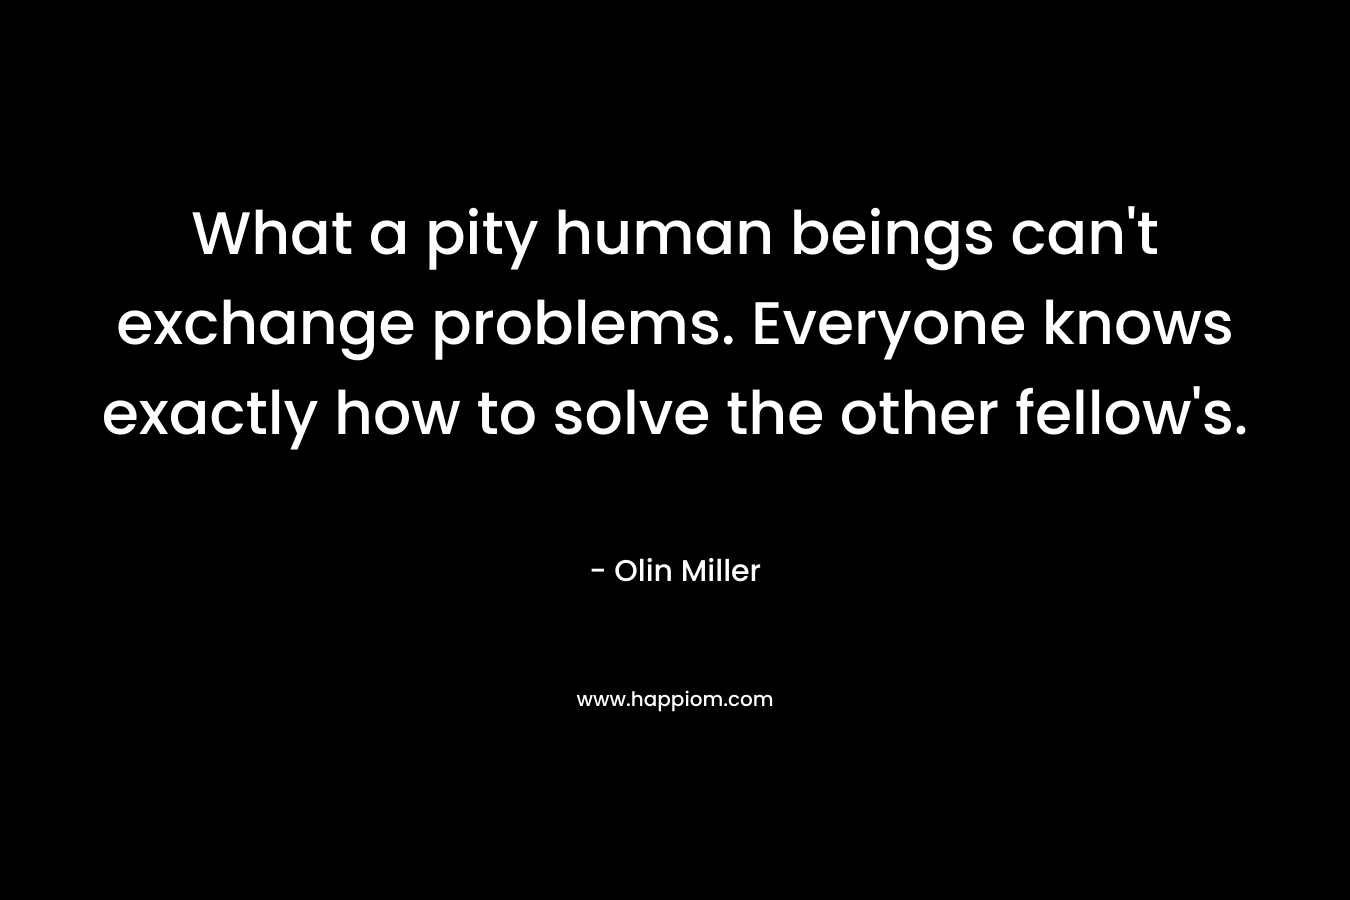 What a pity human beings can’t exchange problems. Everyone knows exactly how to solve the other fellow’s. – Olin Miller